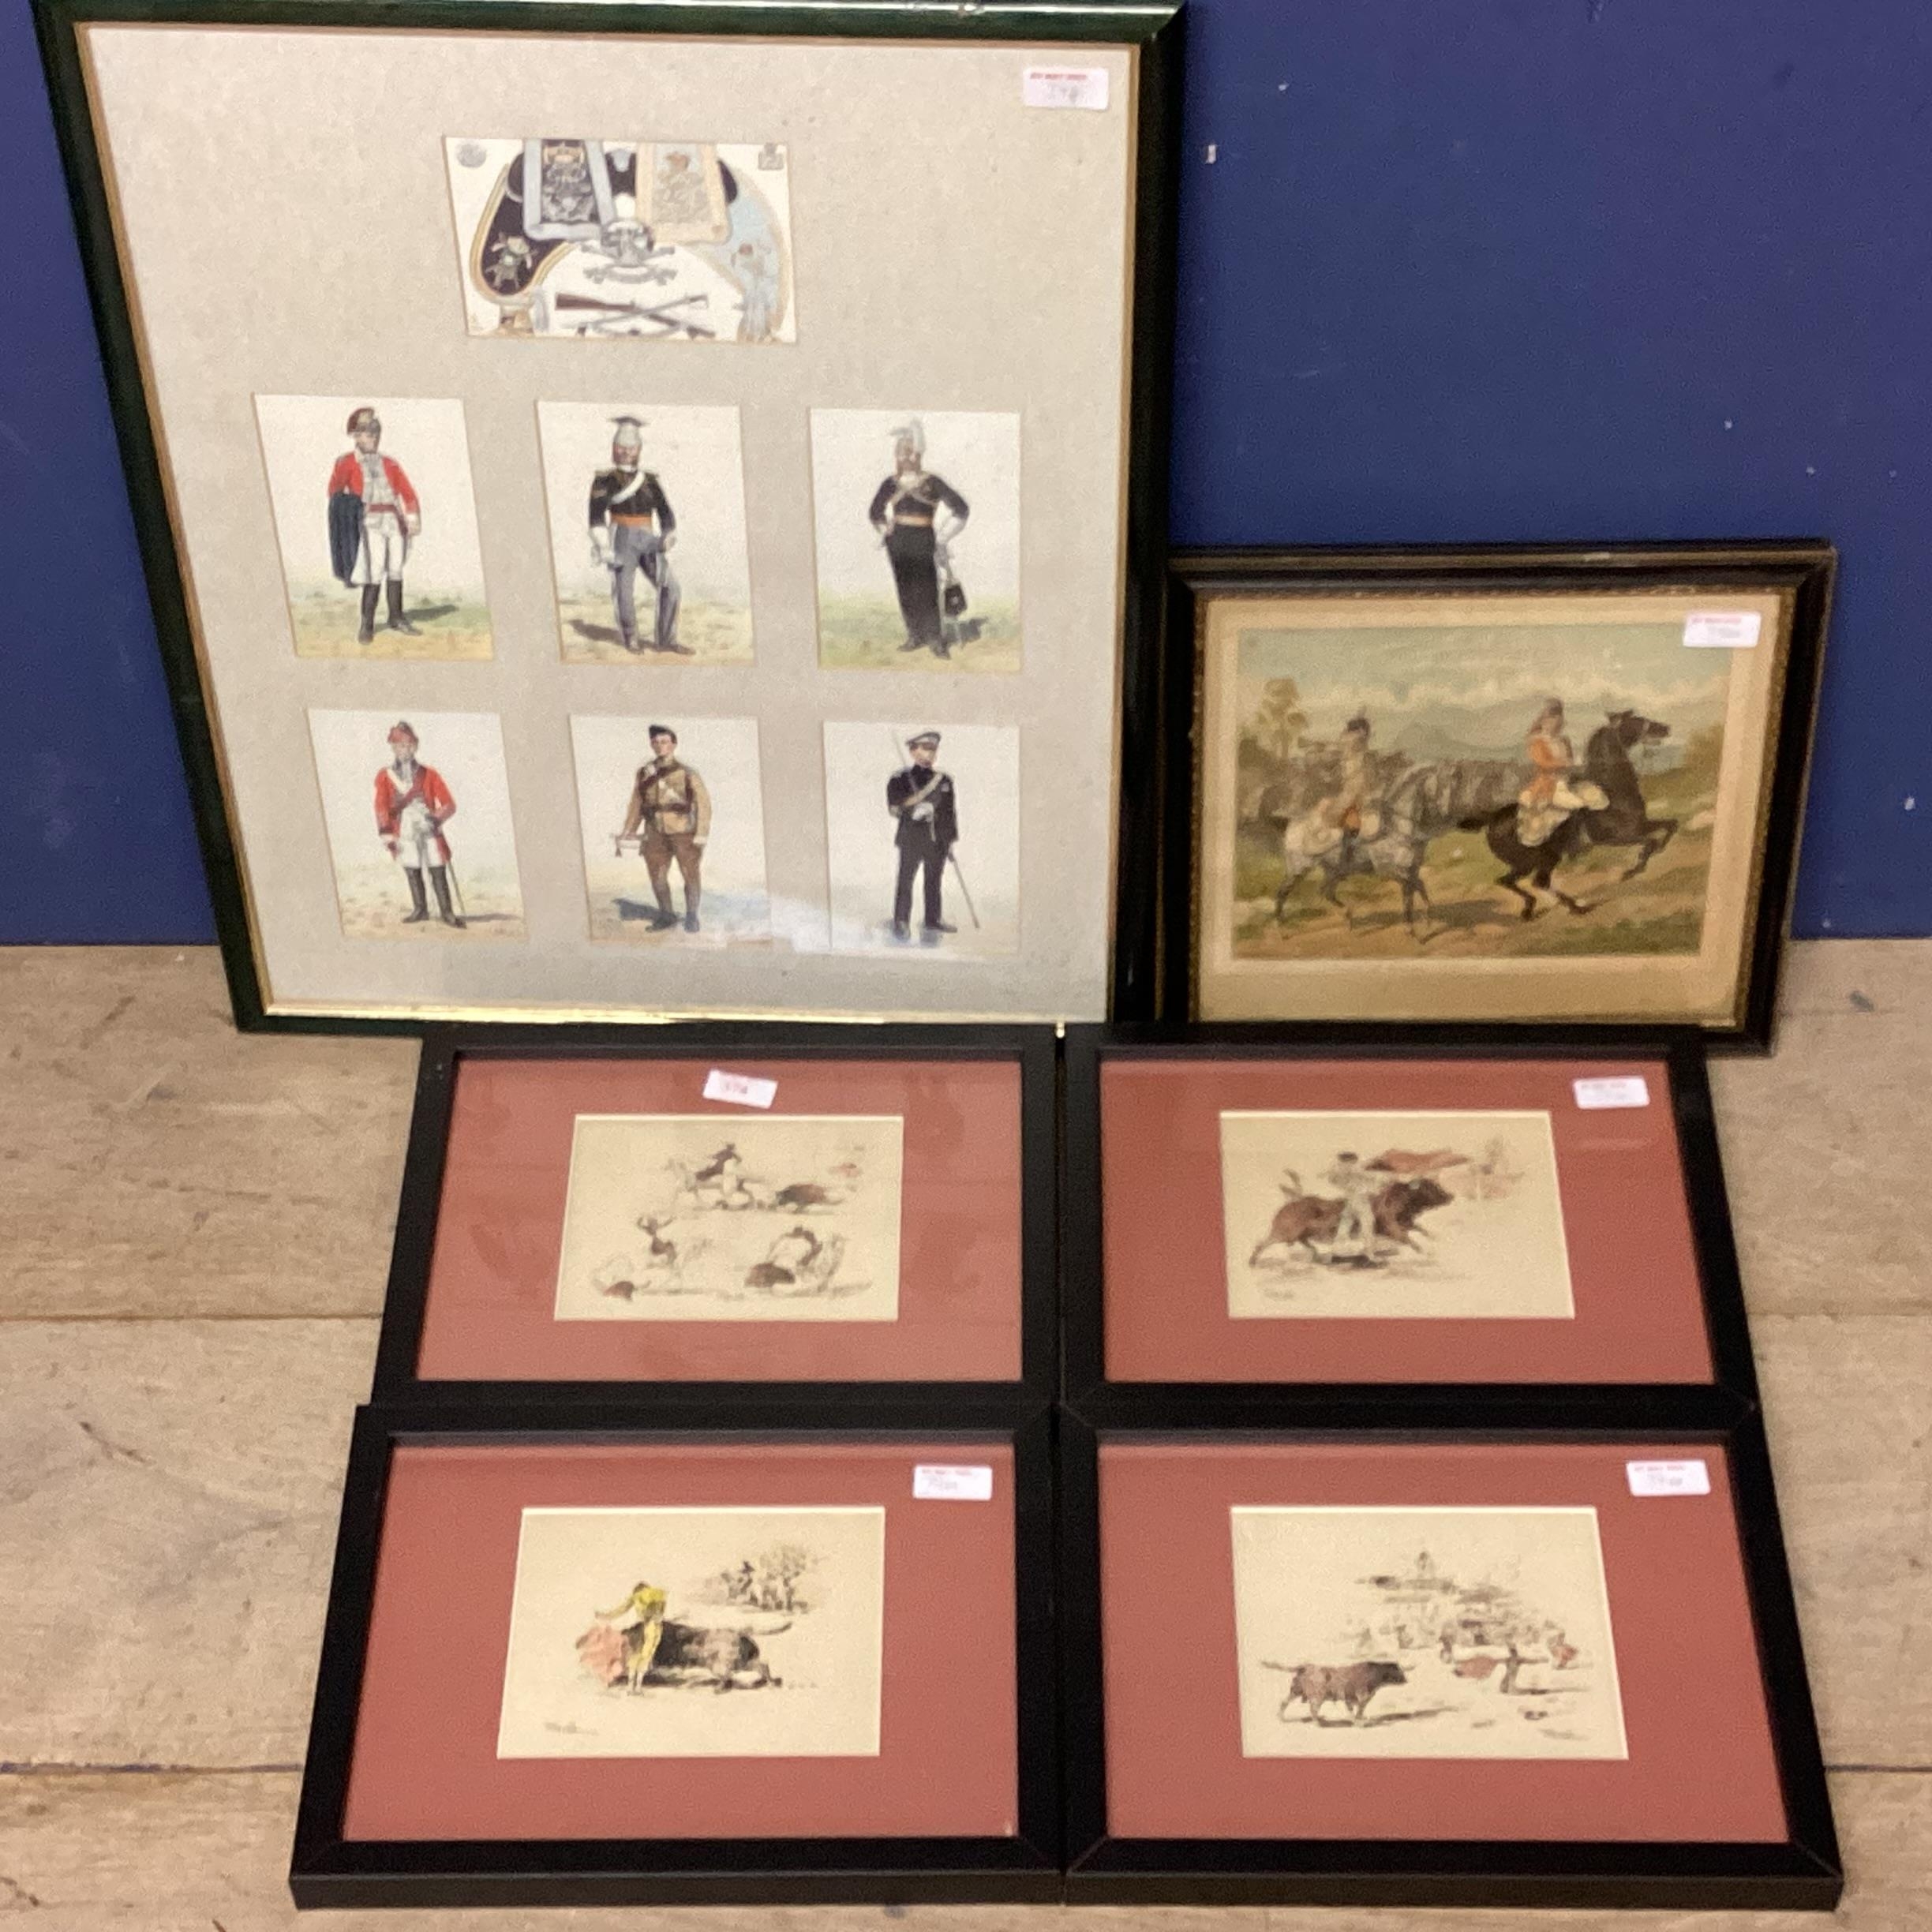 Terruella, Spanish School, C19th/C20th, four etching prints of Bull fighting scenes, and a hand